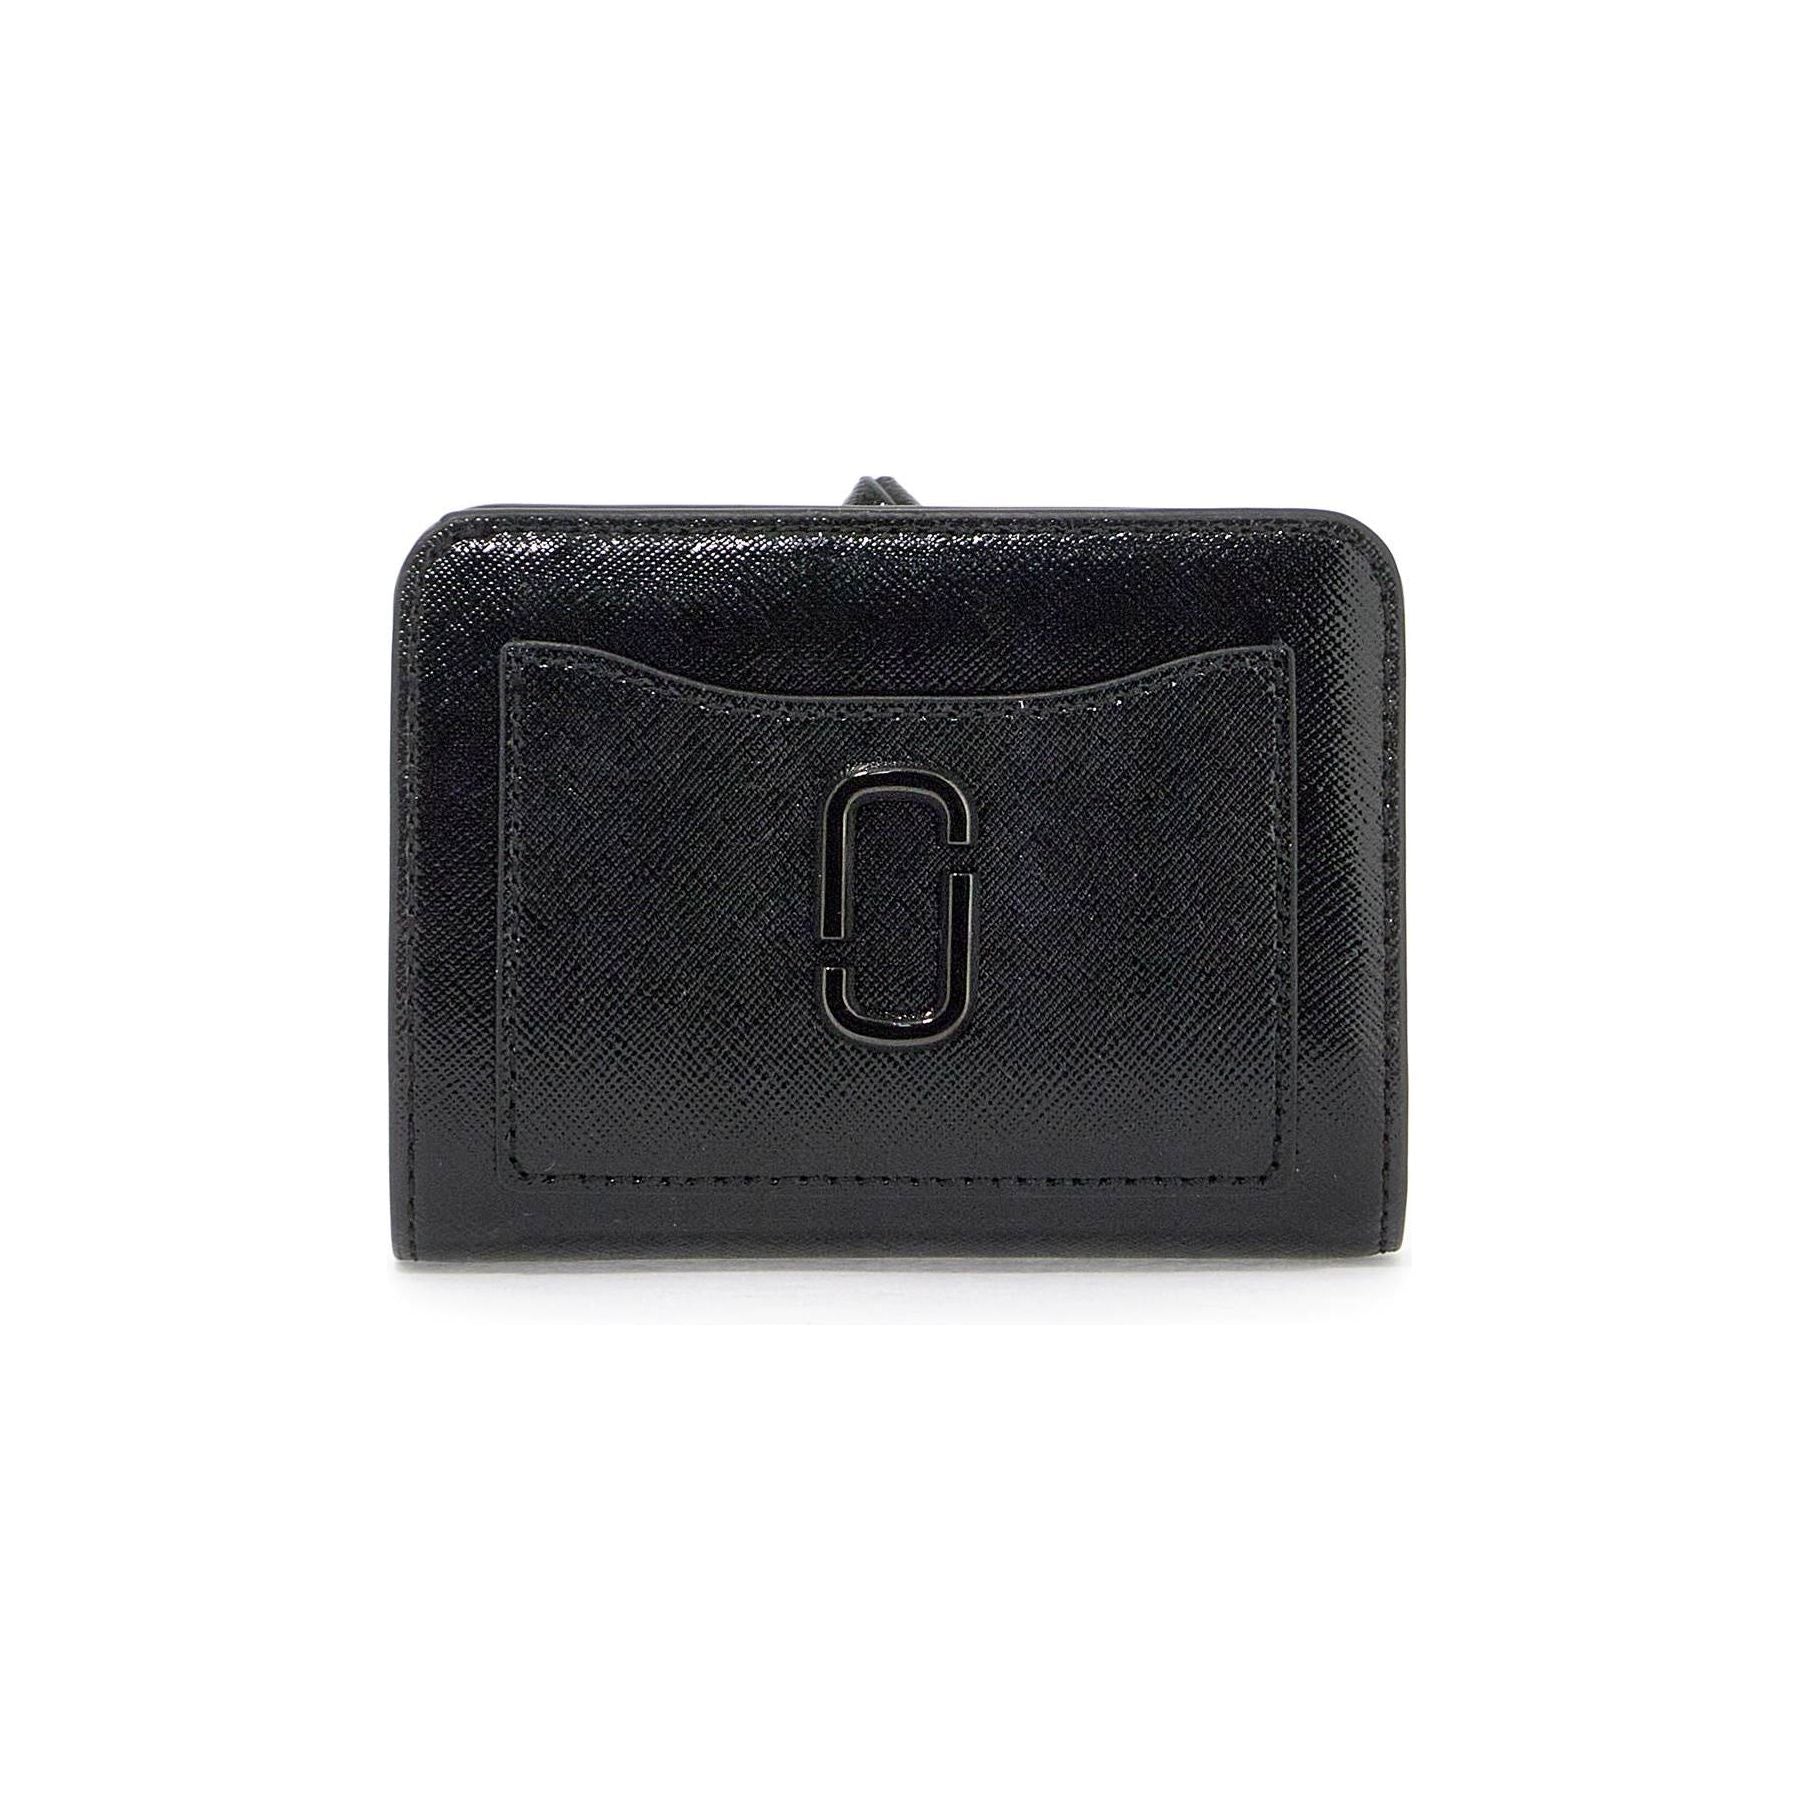 The Utility Snapshot Mini Compact Wallet